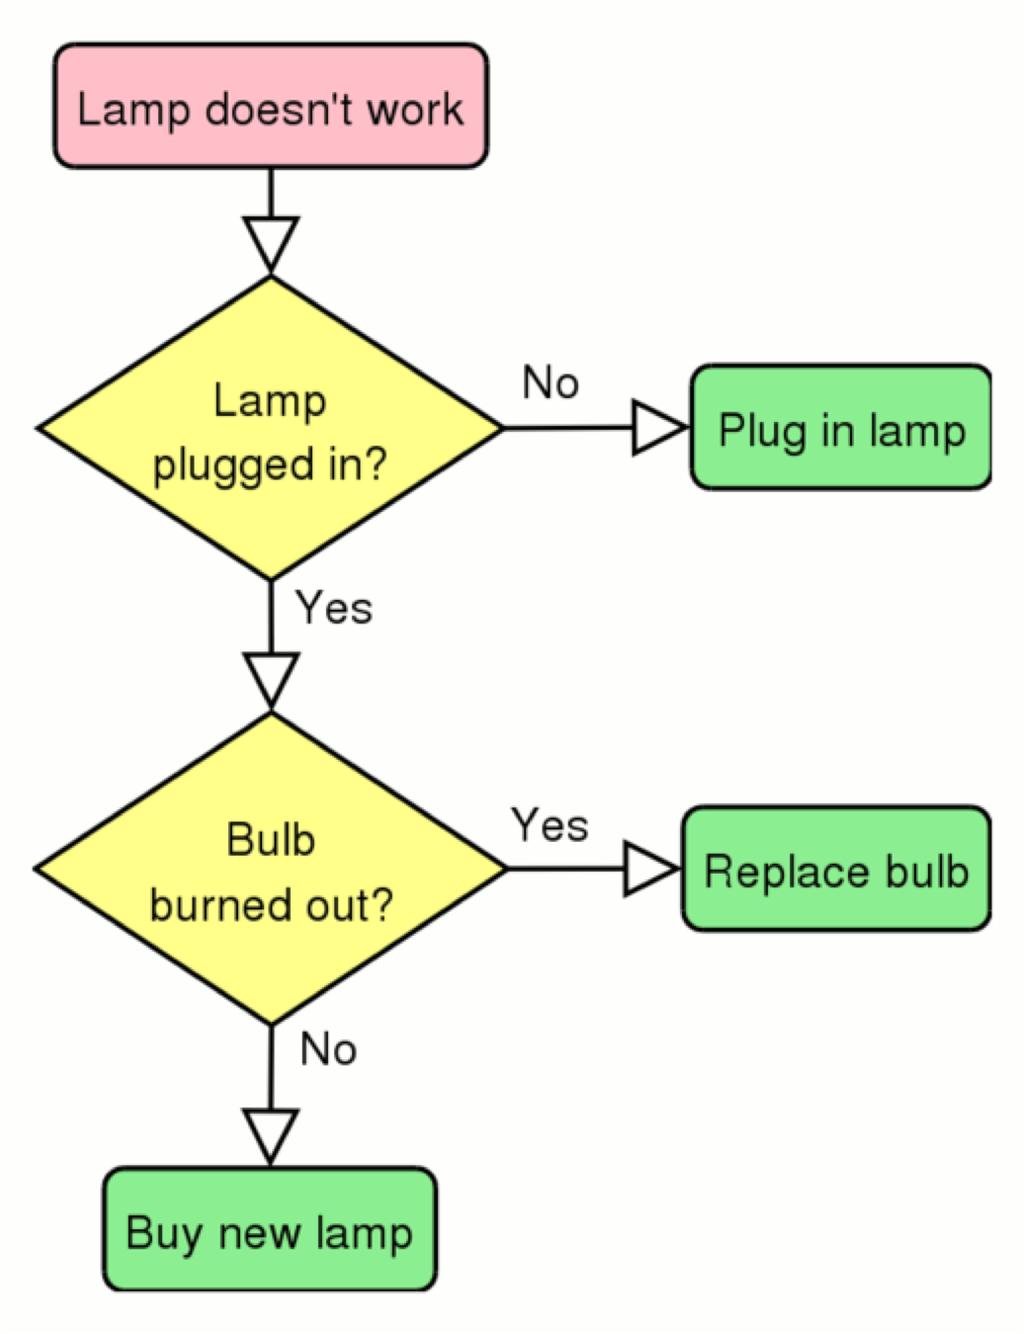 Branching logic Used to implement alternate paths for the logic flow.